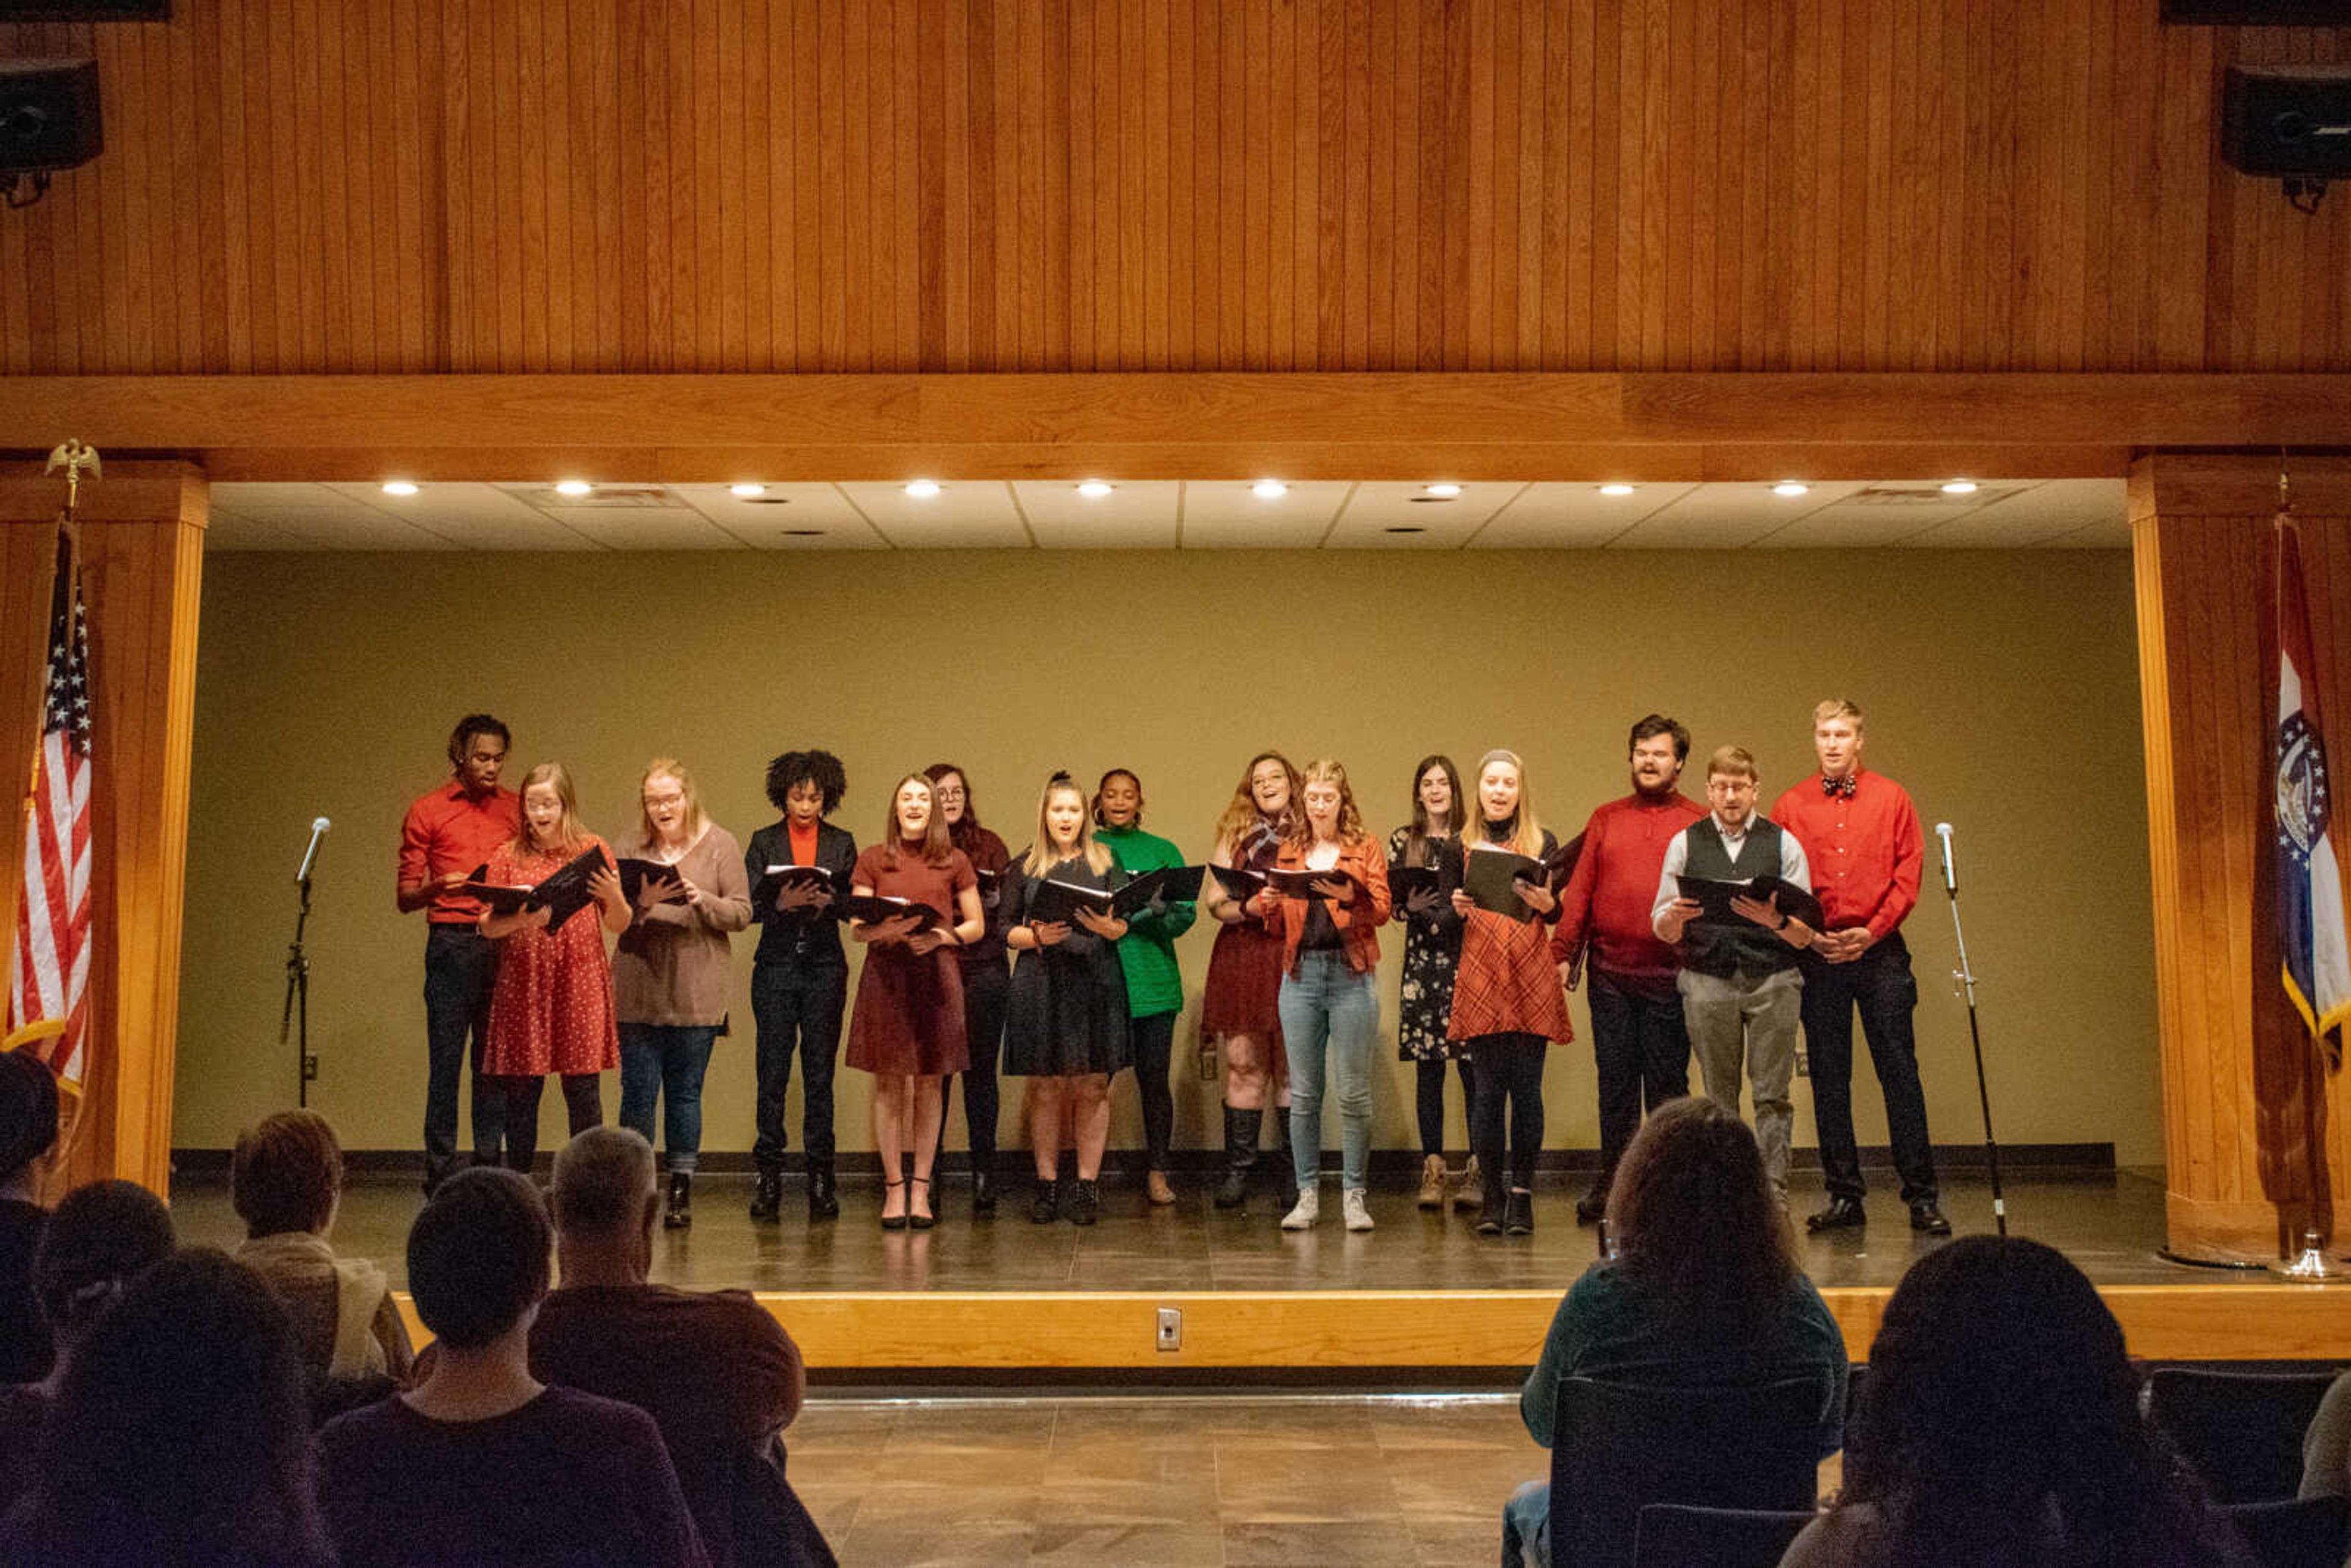 For Redhawk Rhythm A Cappella group, memories were made this semester